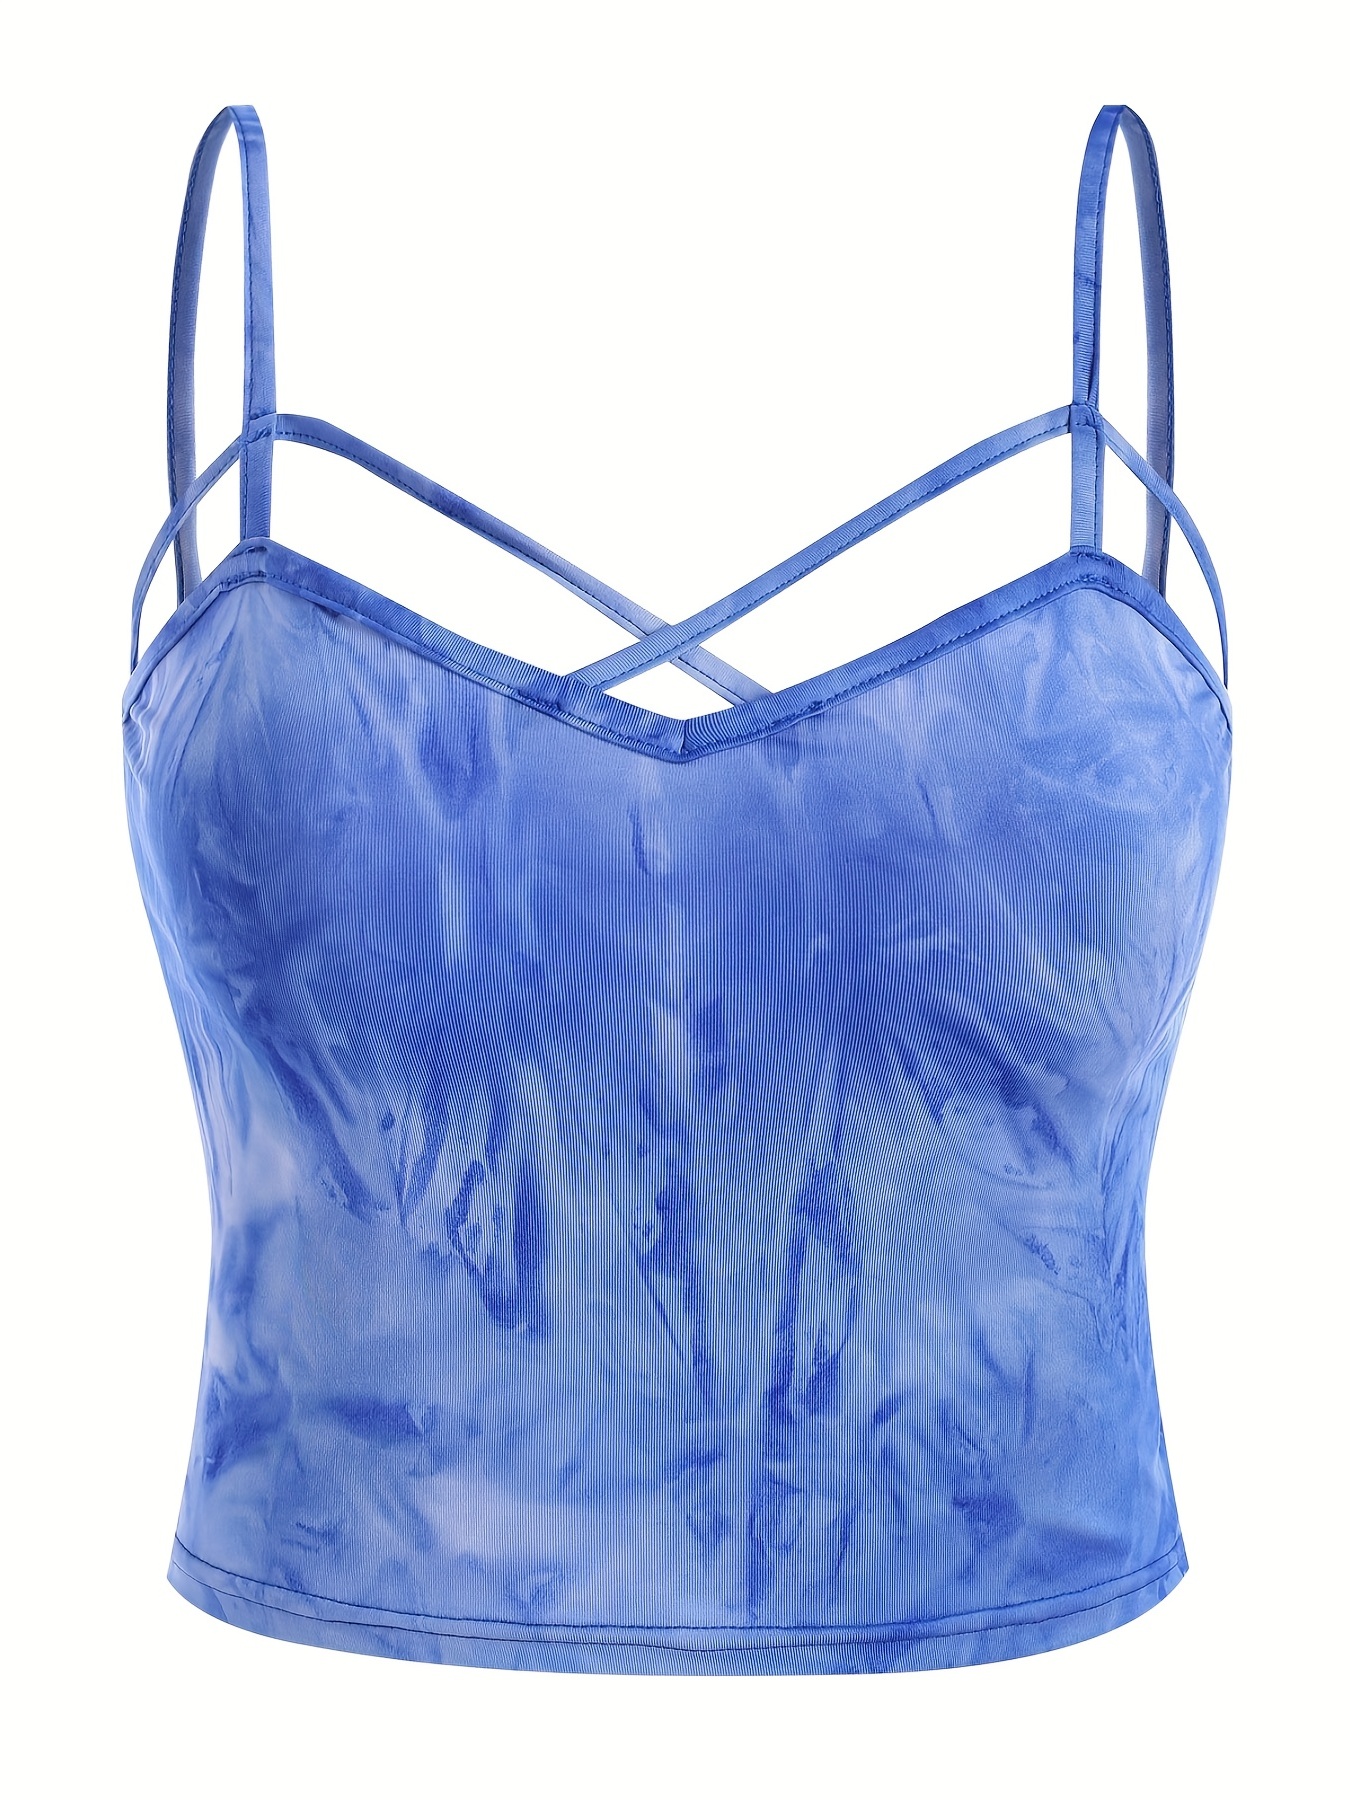 Contrast Lace Spaghetti Strap Top, Y2K Crop Sleeveless Cami Top For Summer,  Women's Clothing